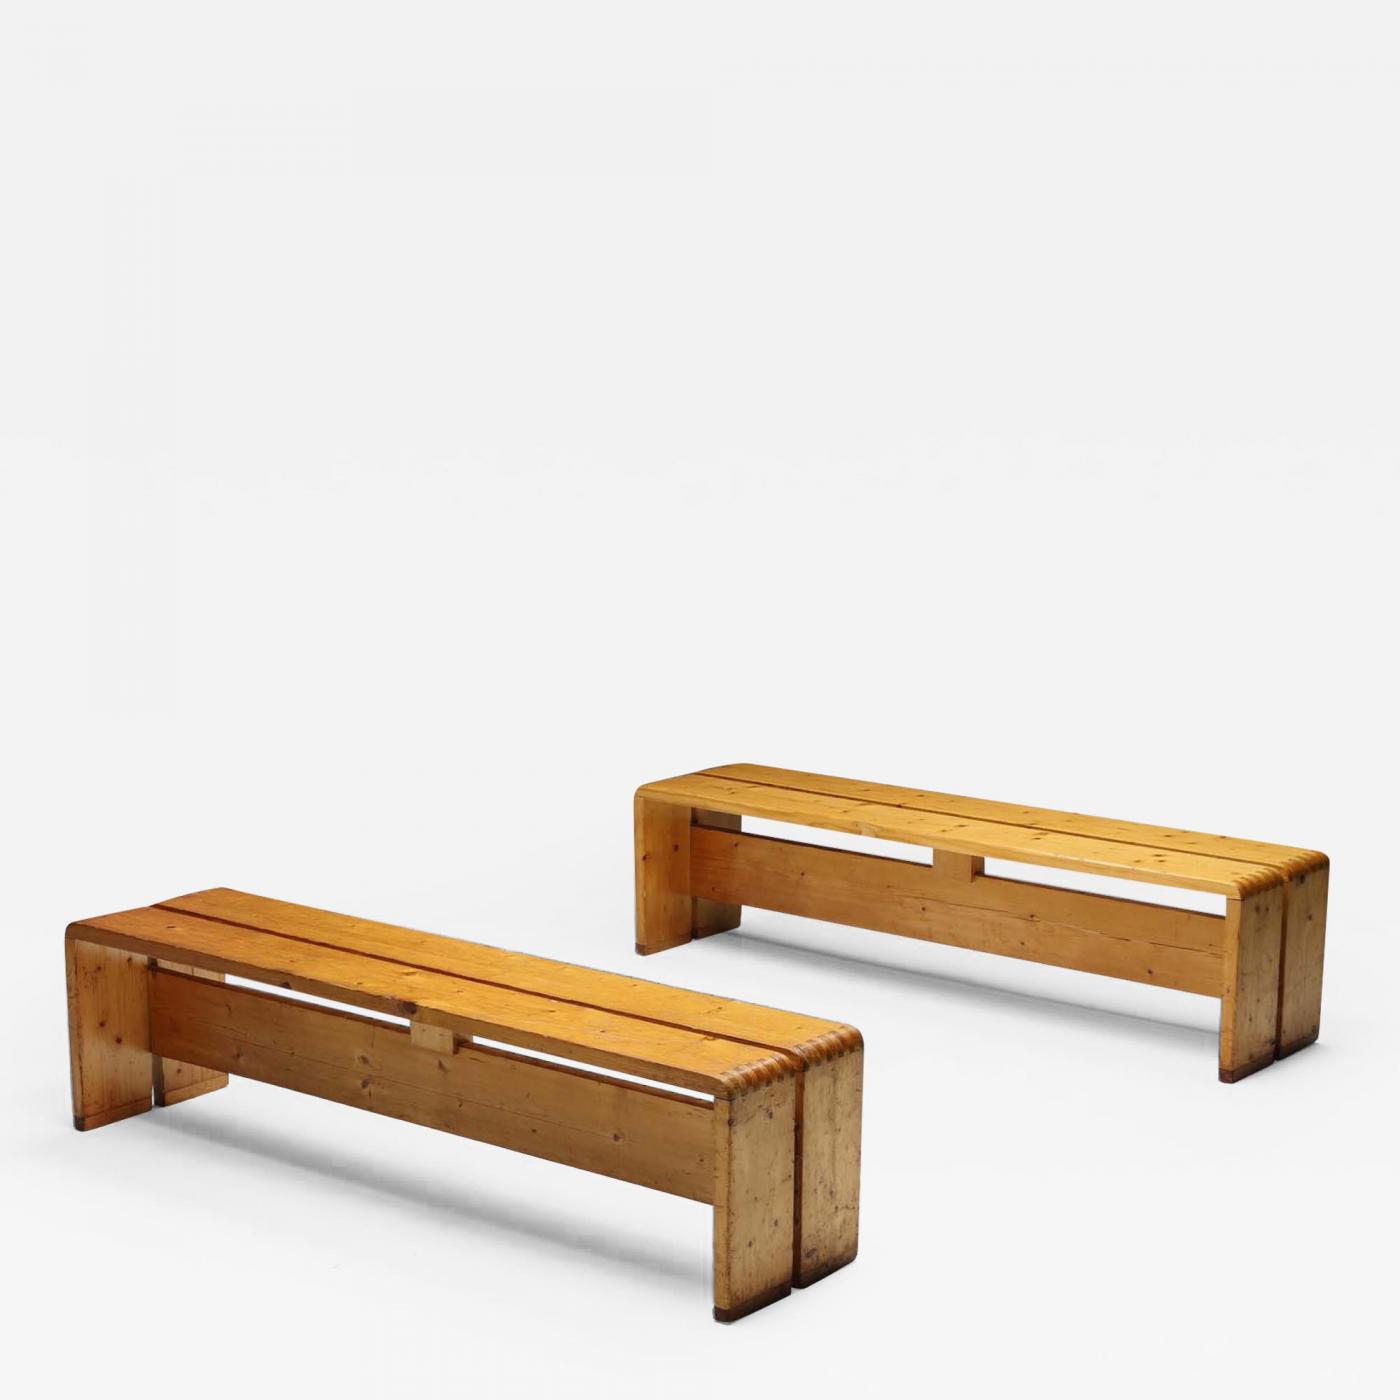 Charlotte Perriand - Charlotte Perriand Les Arcs bench - 1960's